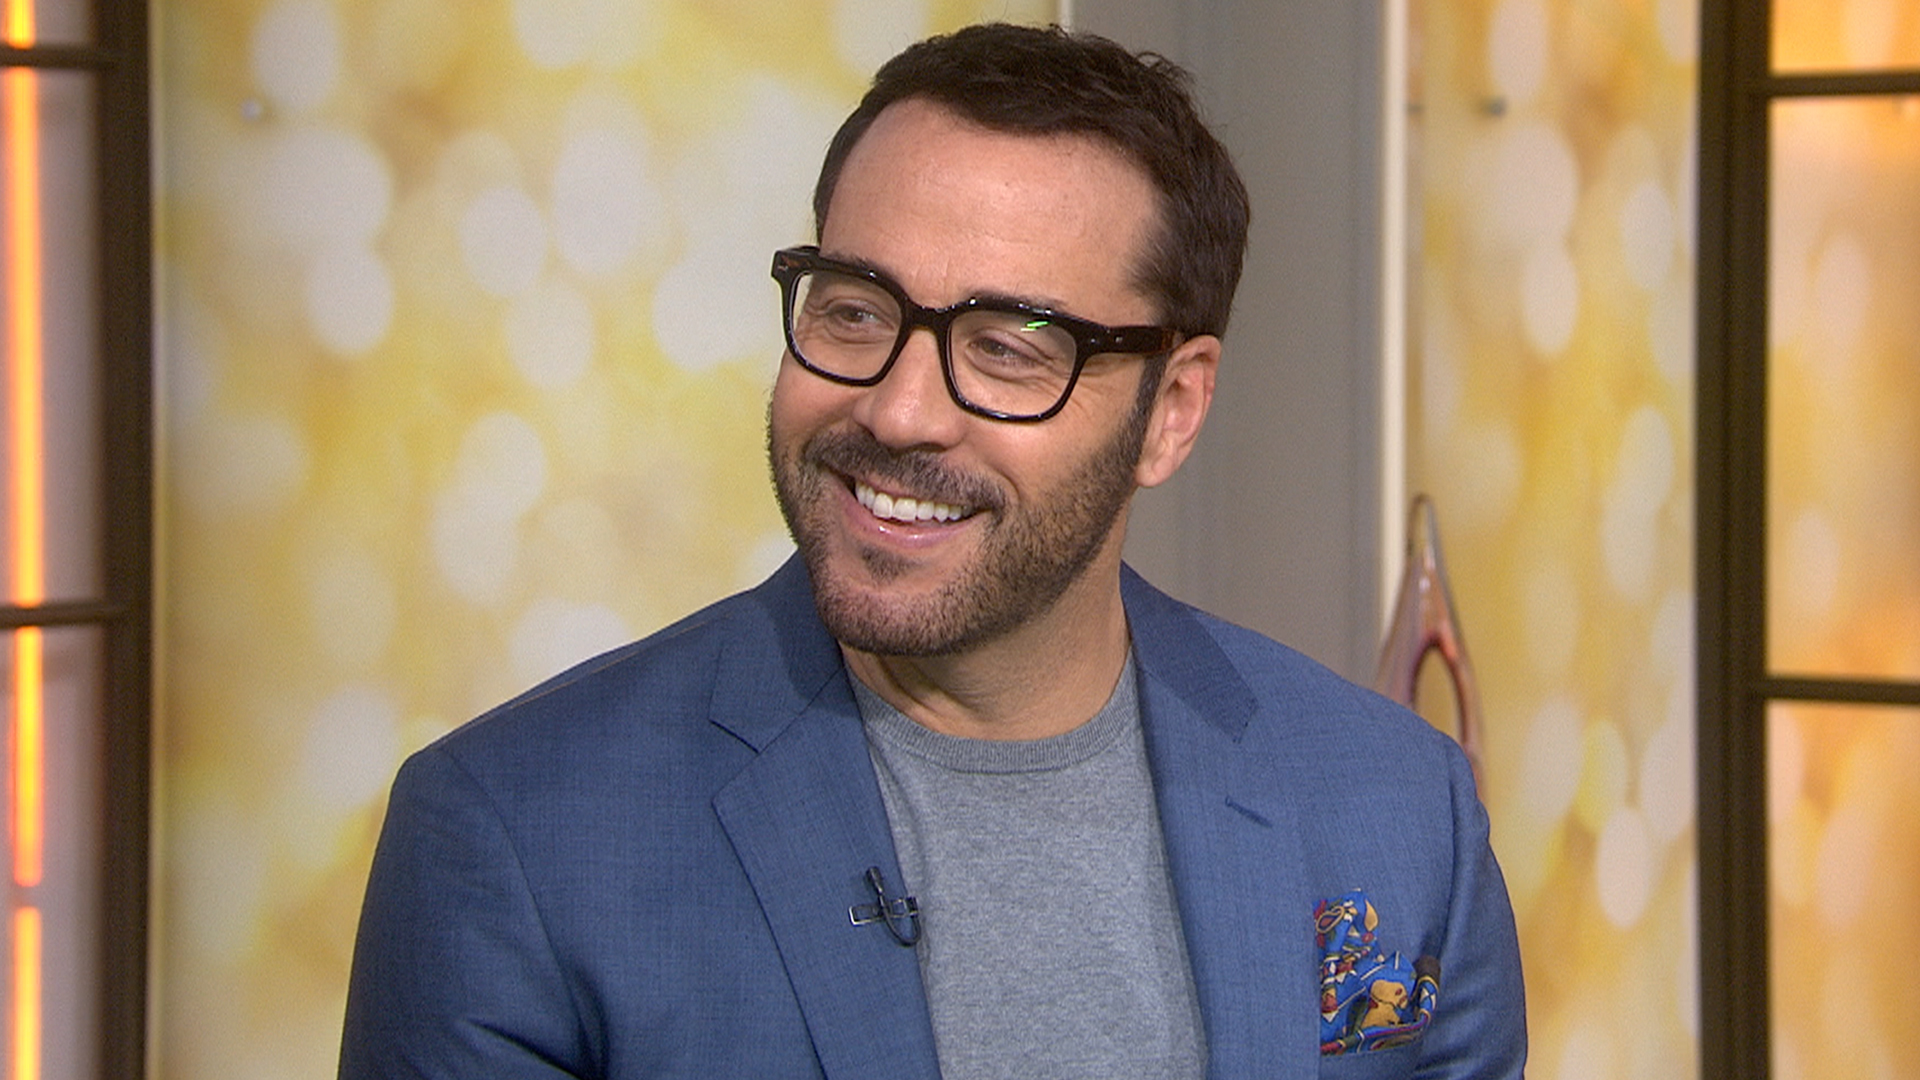 Jeremy Piven’s Most Iconic Facial Expressions Captured In Photos